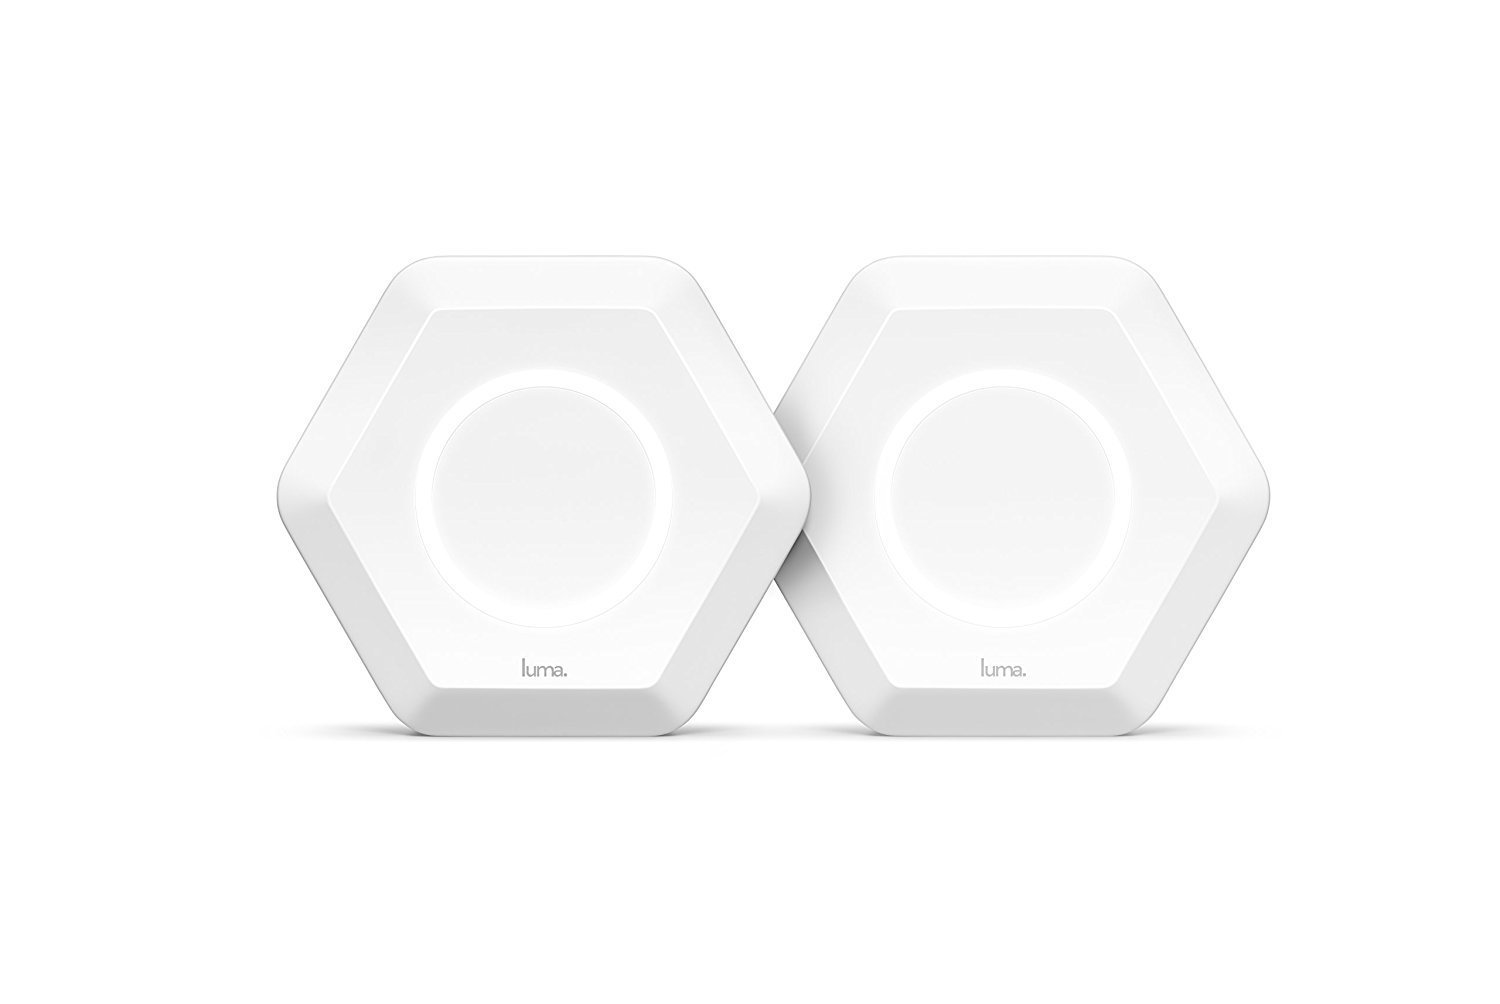 Price drop! 2-pack Luma whole home Wi-Fi for $66